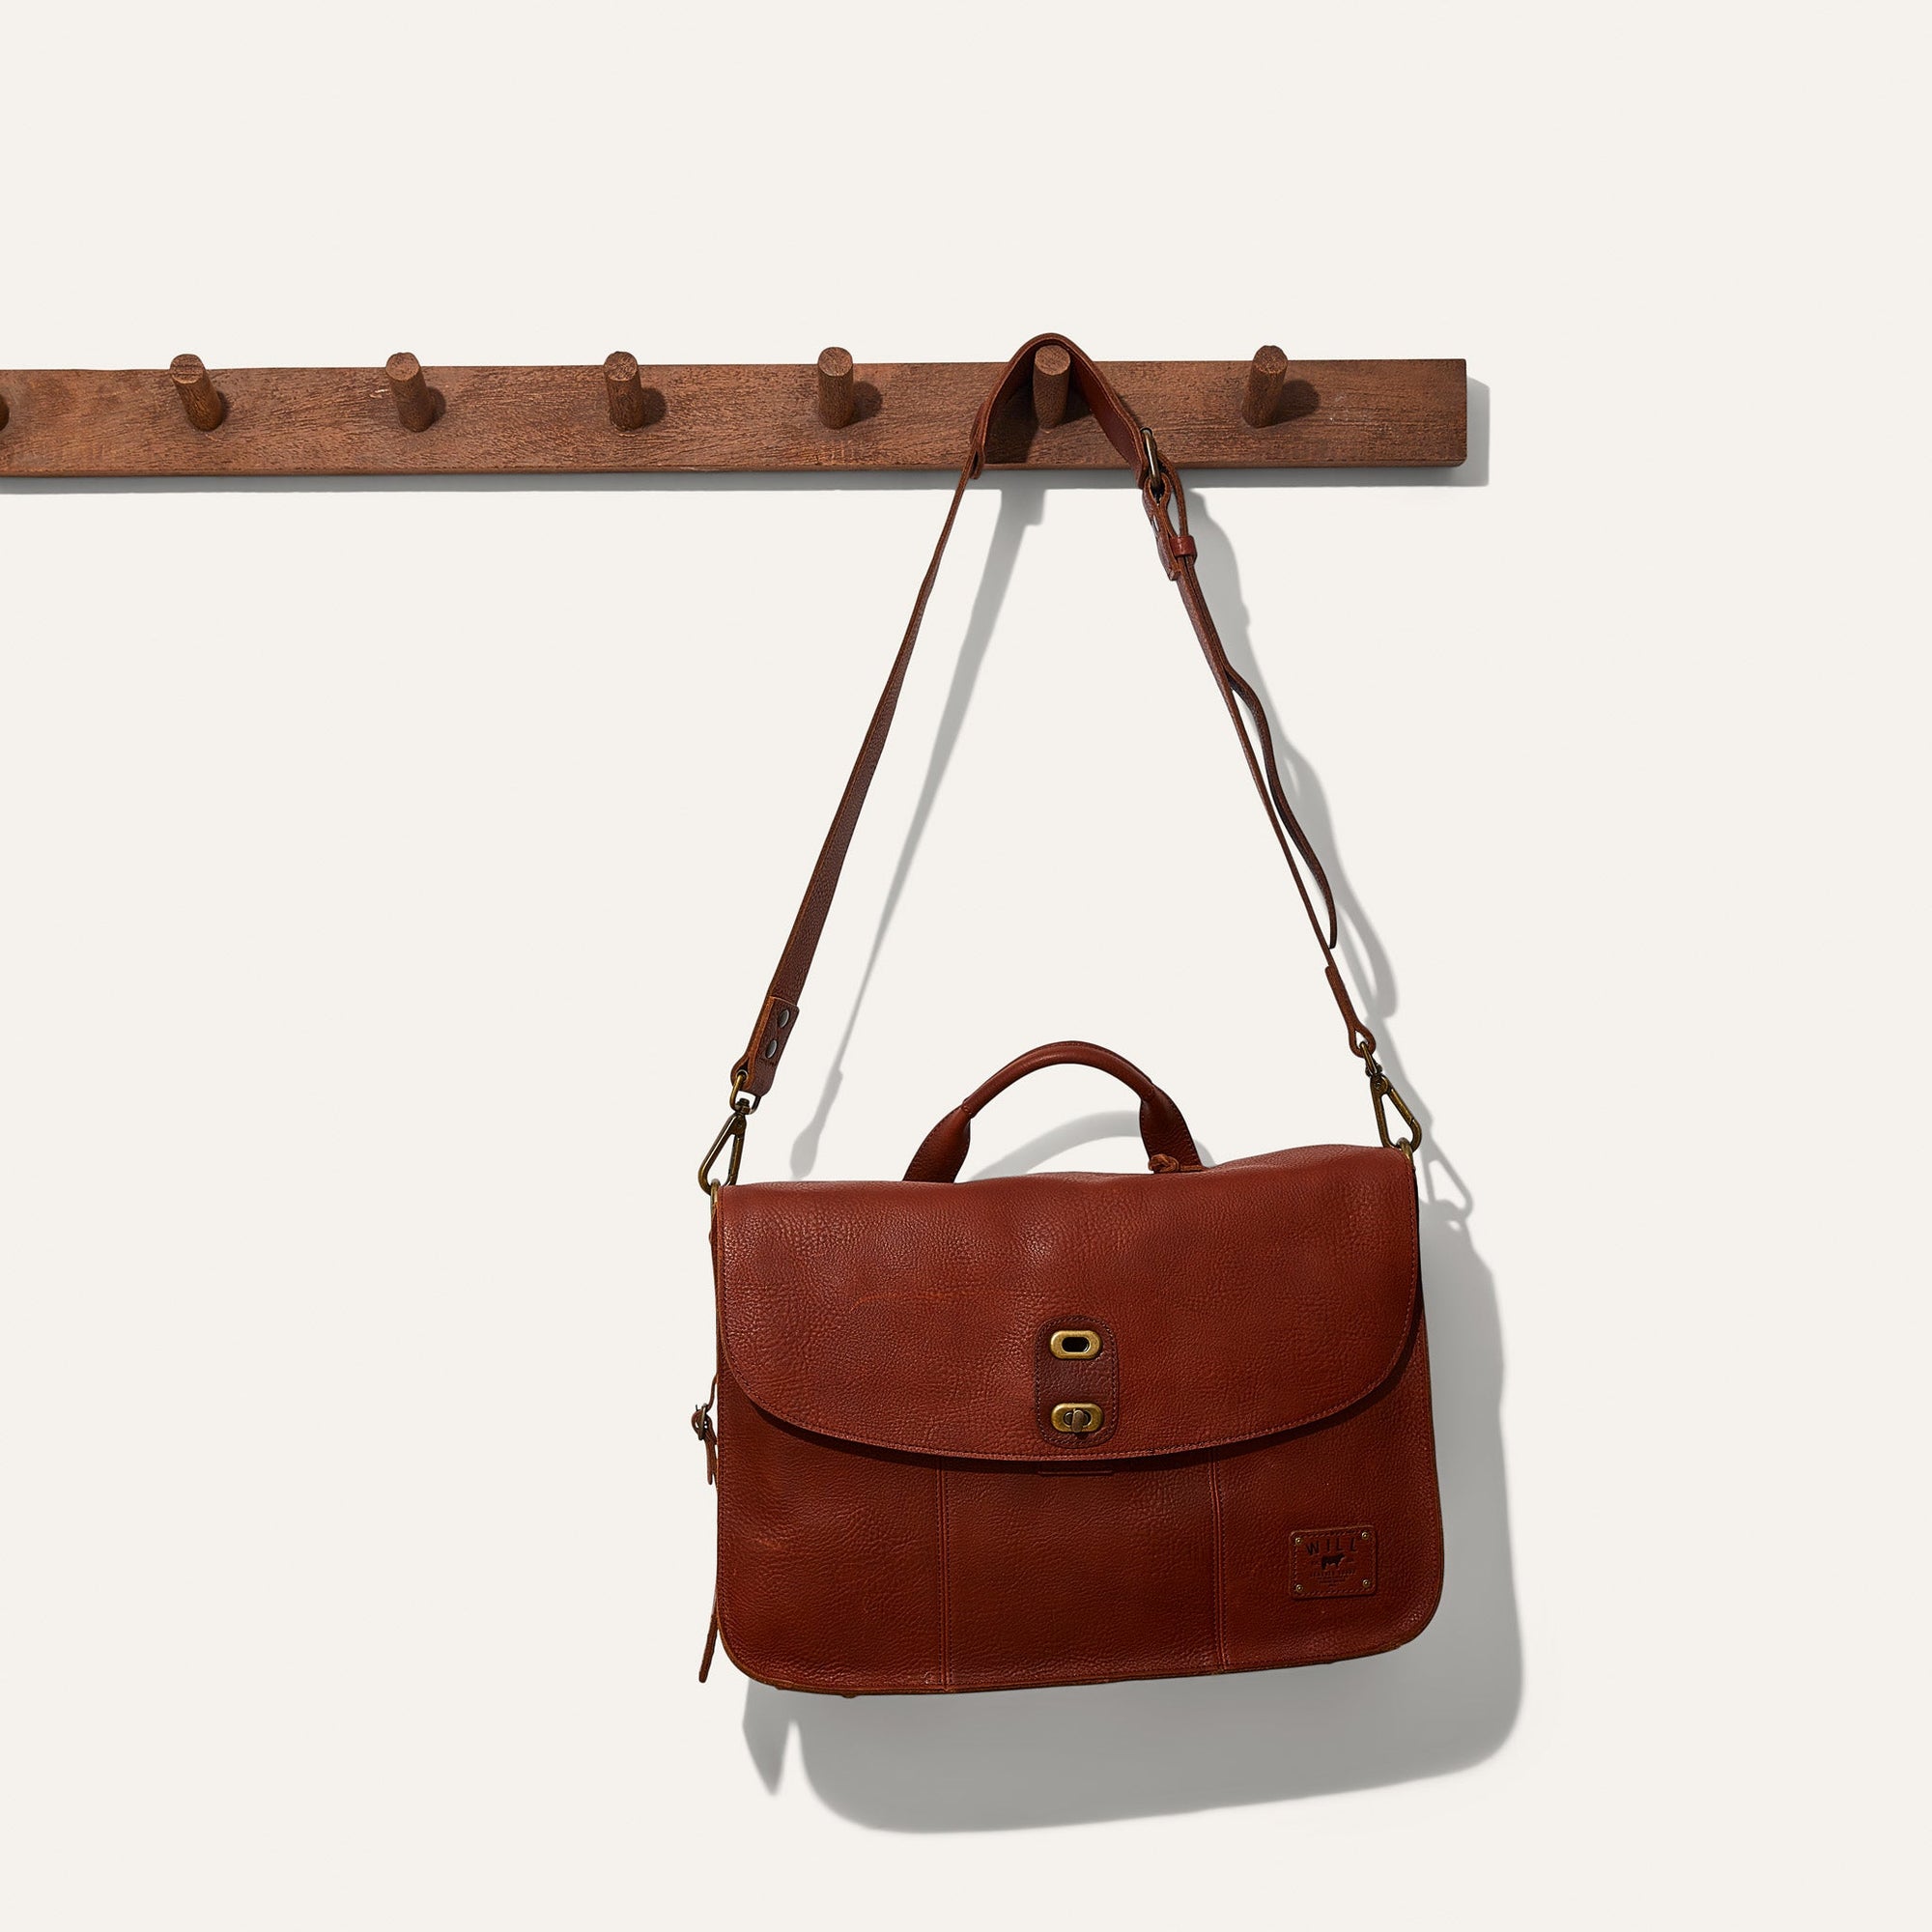 Kent Leather Messenger Bag in Cognac by Will Leather Goods